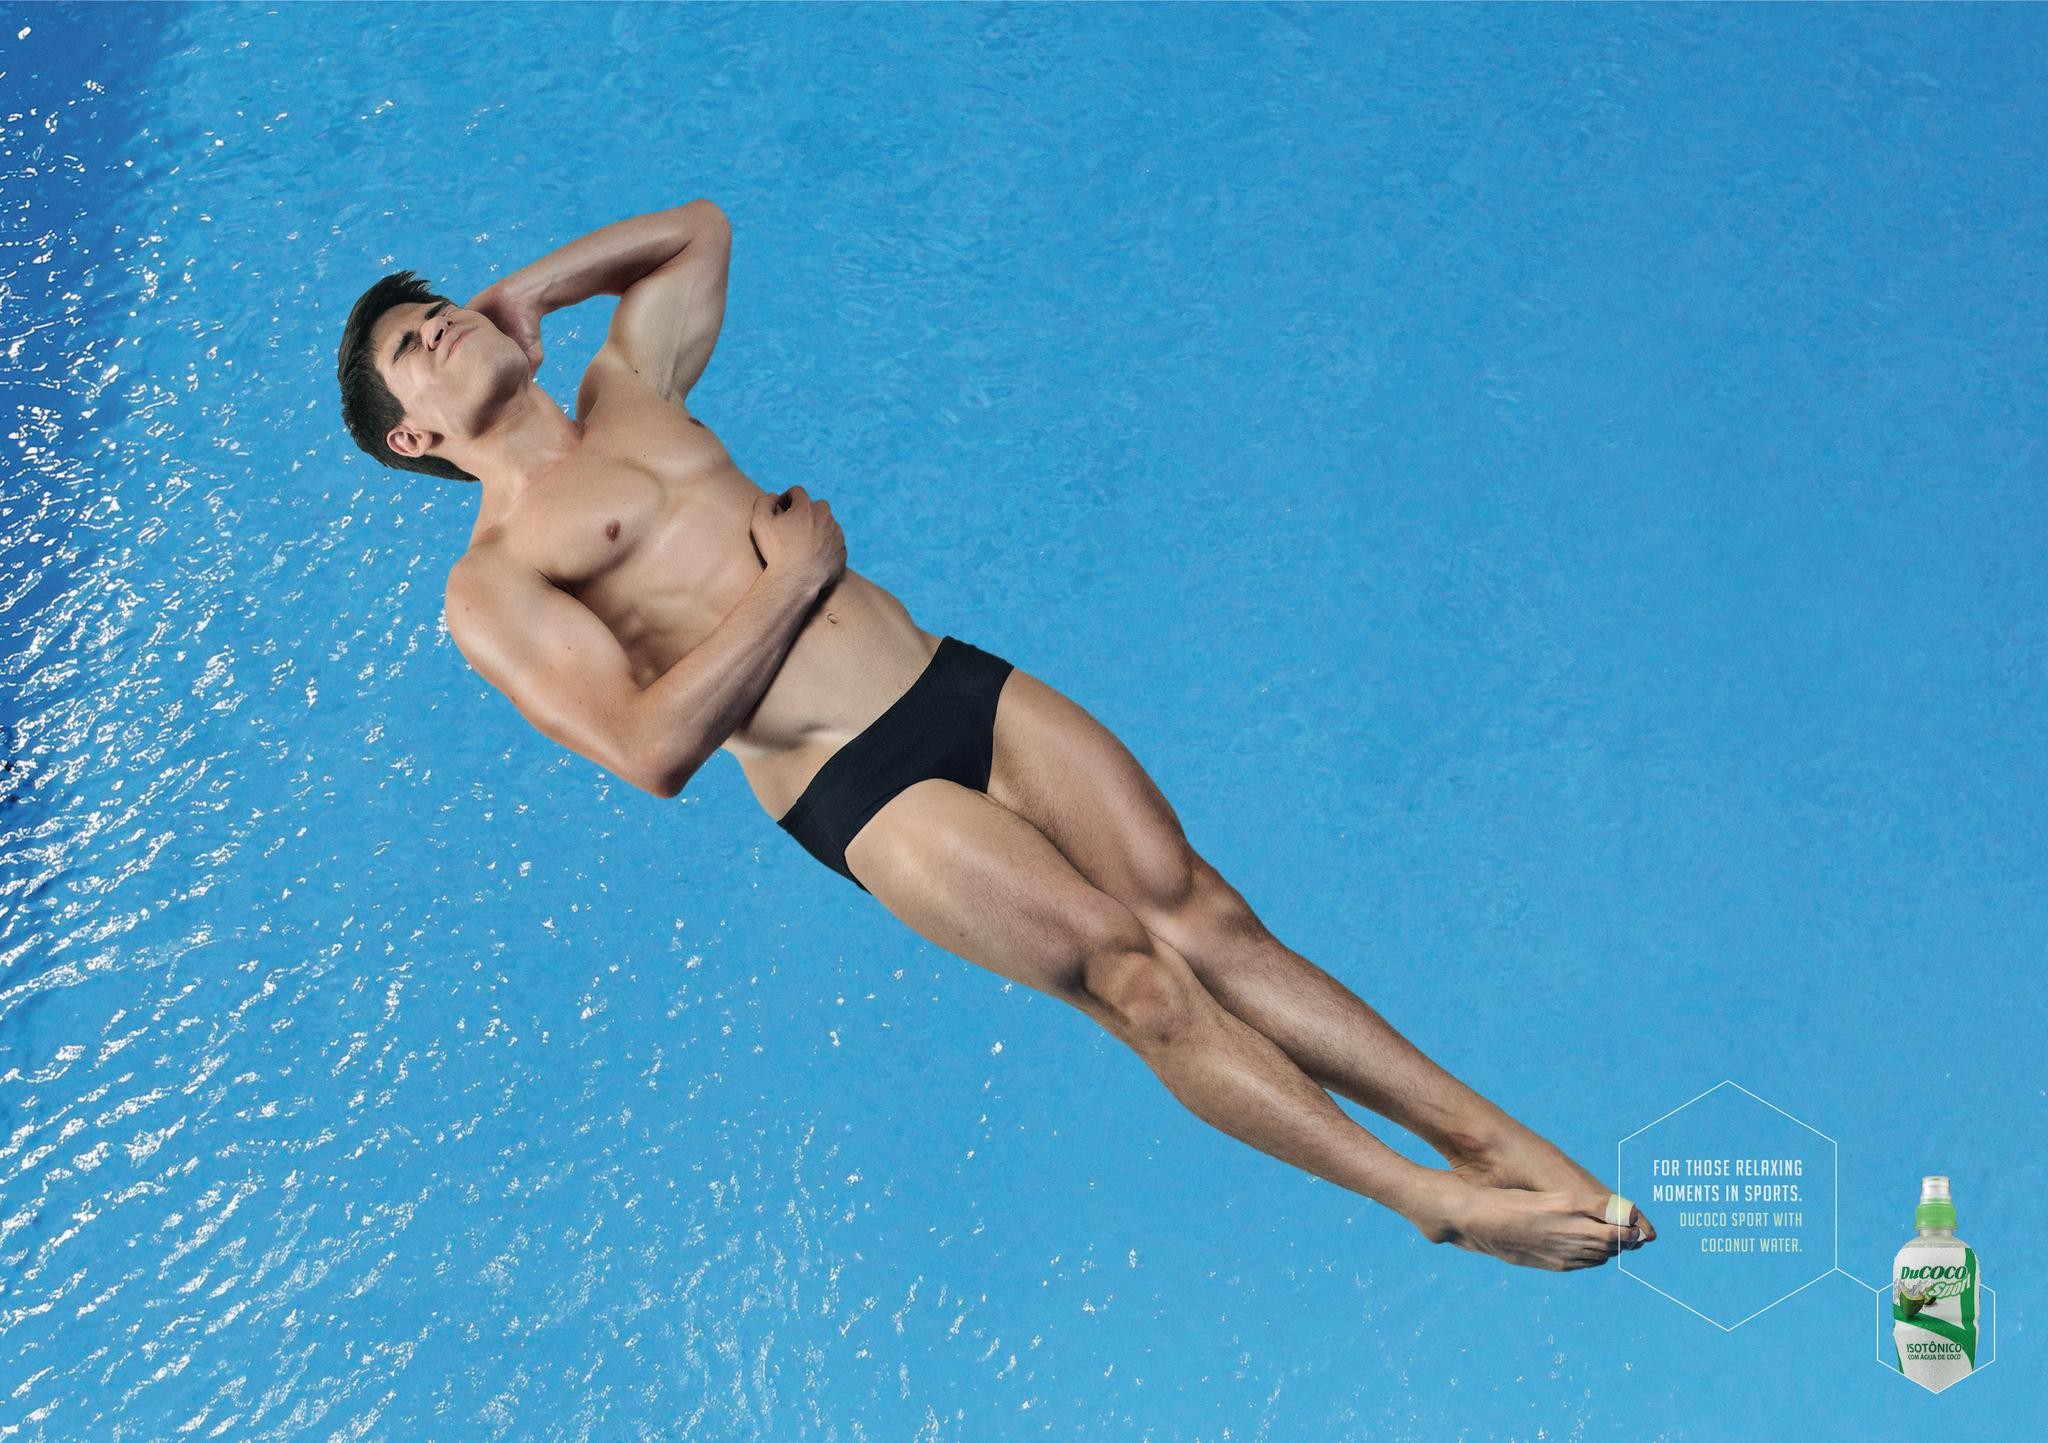 OLYMPIC DIVING